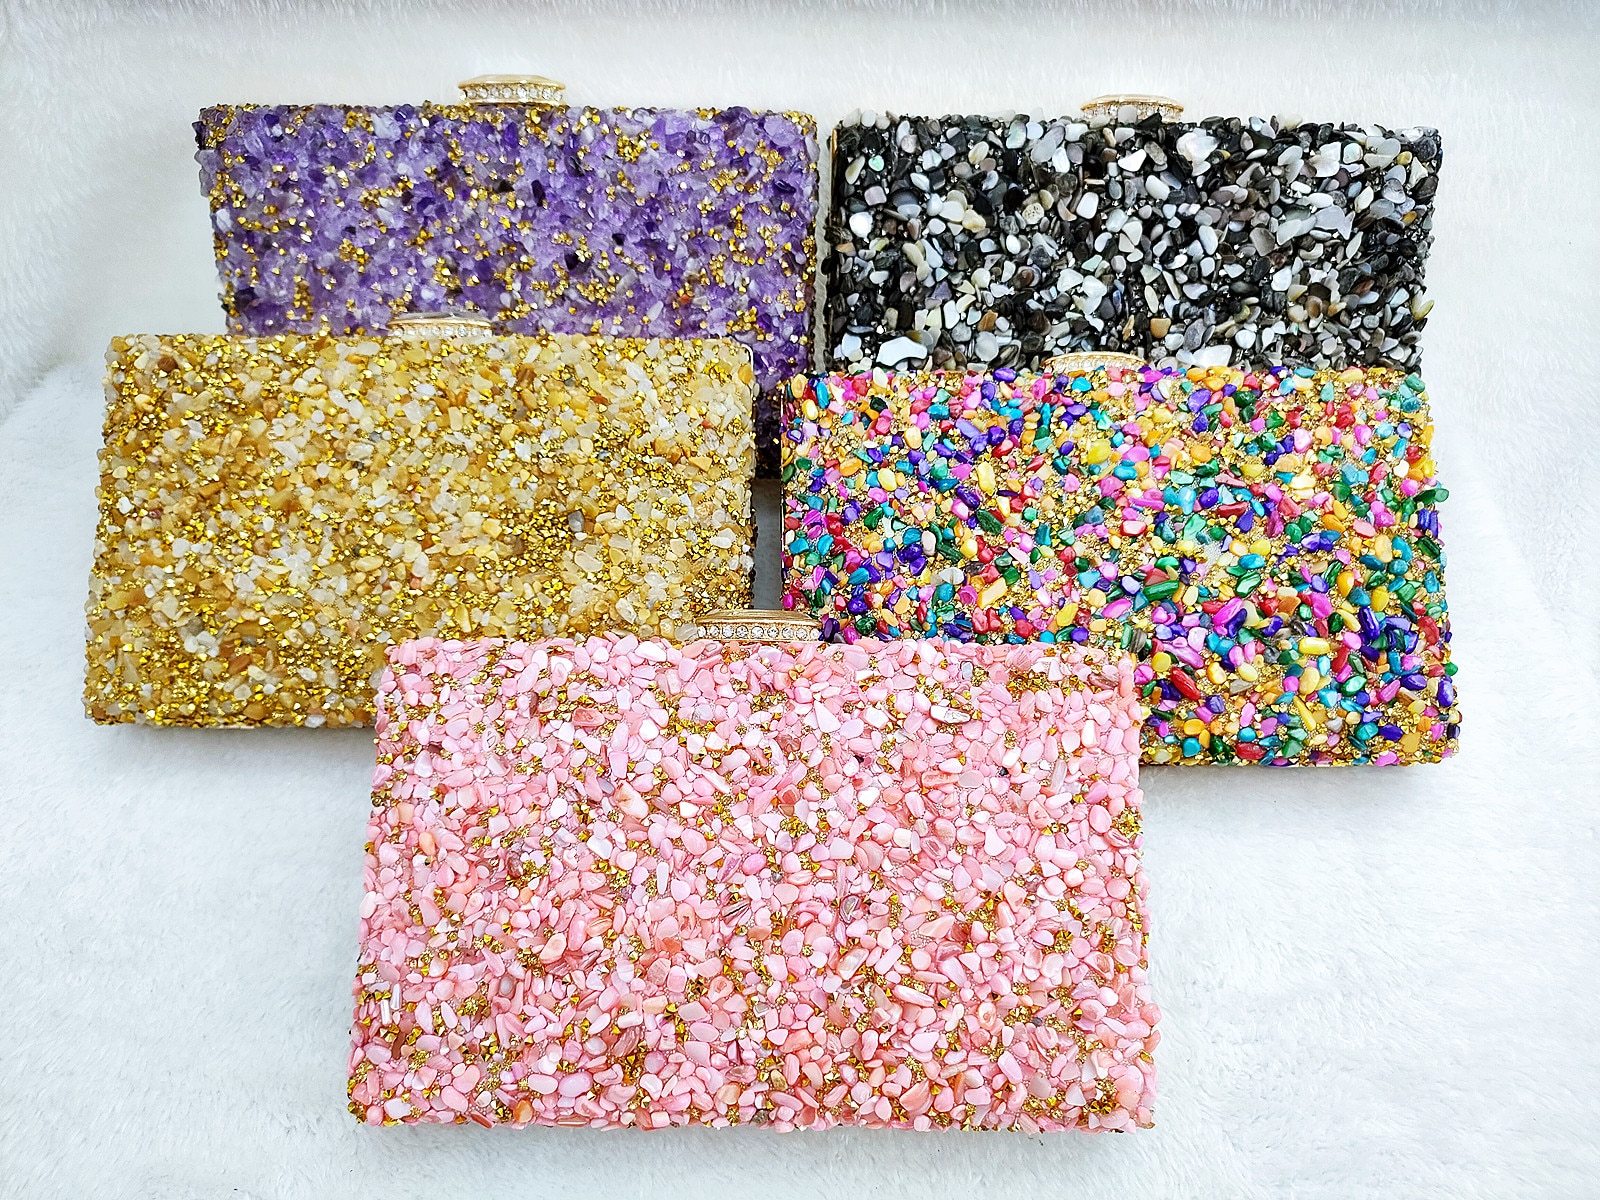 Stones Clutch Bags Women Party Purse Evening Bags Clultches Formal Party Dinner Rhinestone Handbags Crystal